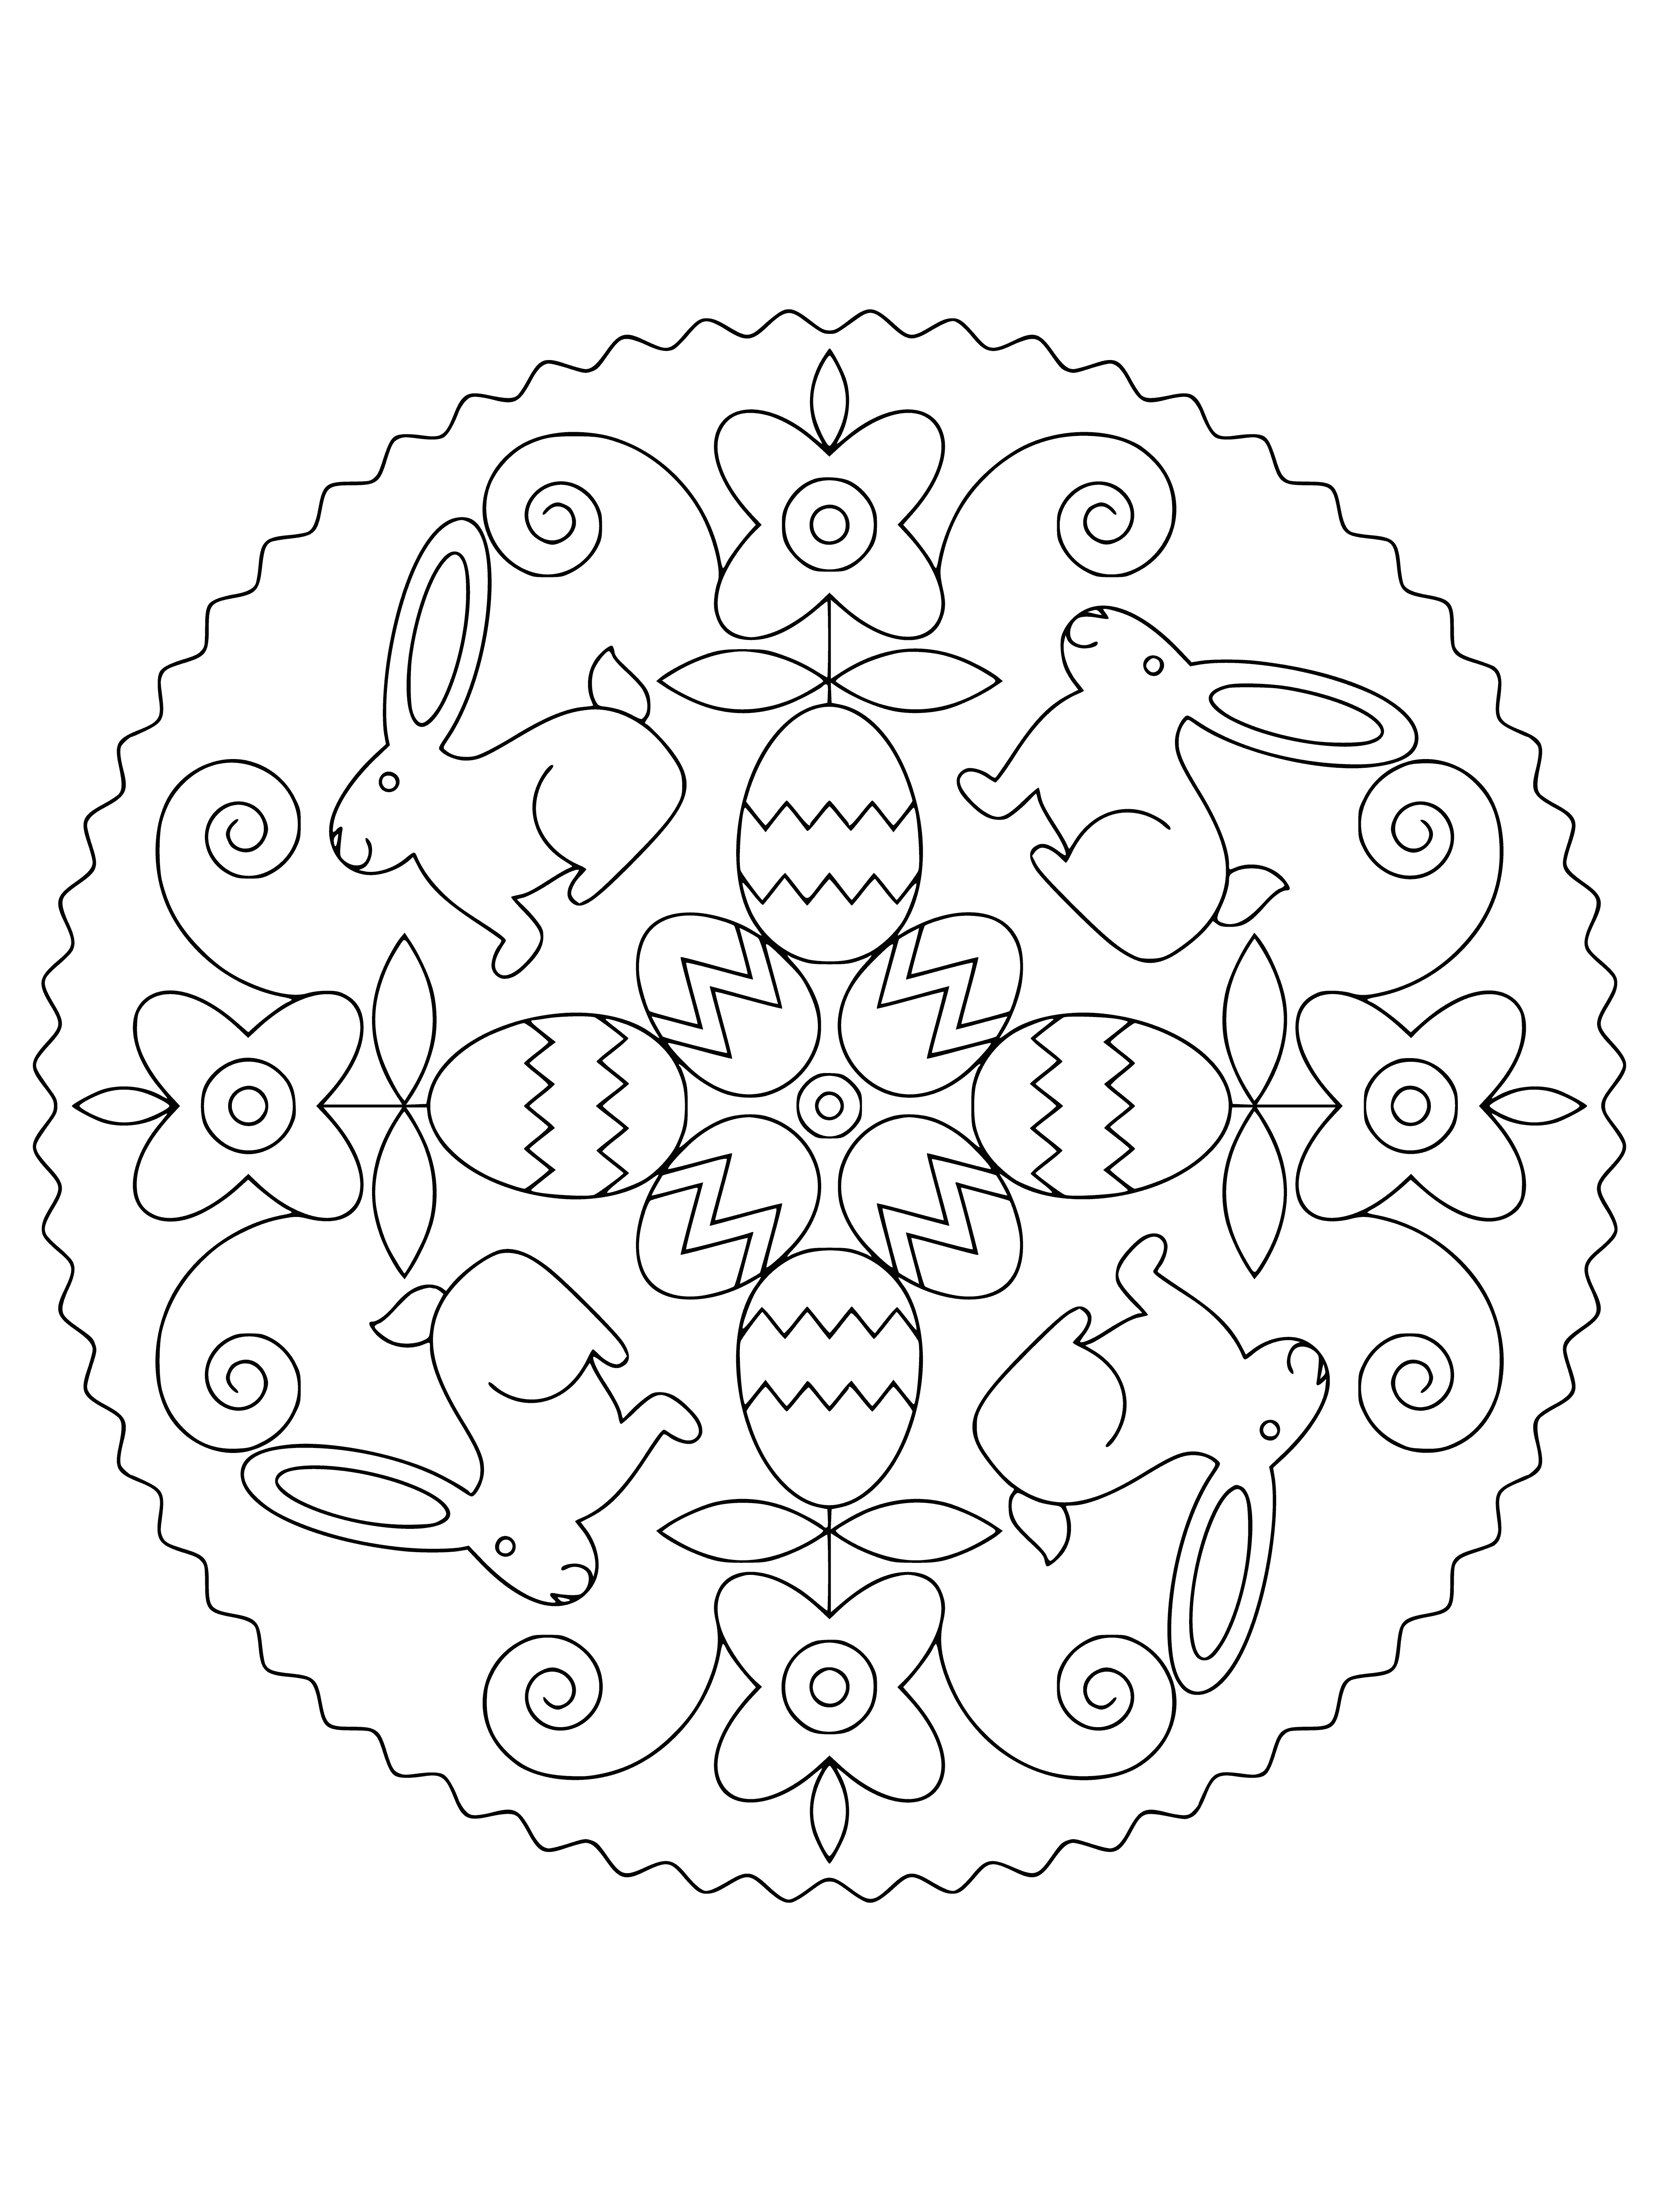 coloring page: Beautiful Easter mandala design featuring eggs, bunnies, & flowers. Perfect for a cheerful Easter coloring page! #Easter #Coloring #Mandala